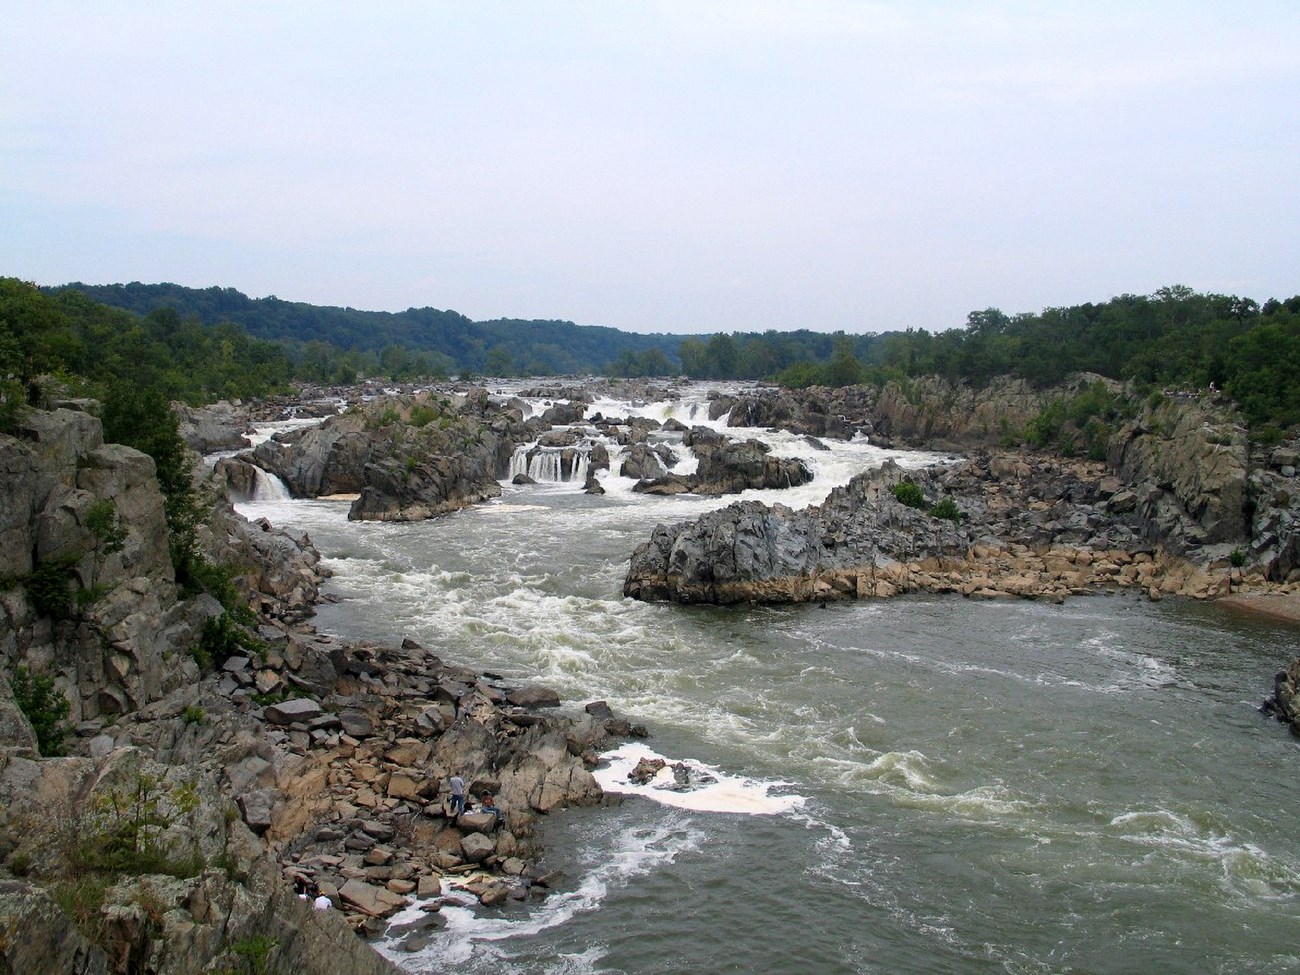 A river winds through a rocky landscape. The rocks are gray and beige in color. A forest and blue skies are in the background